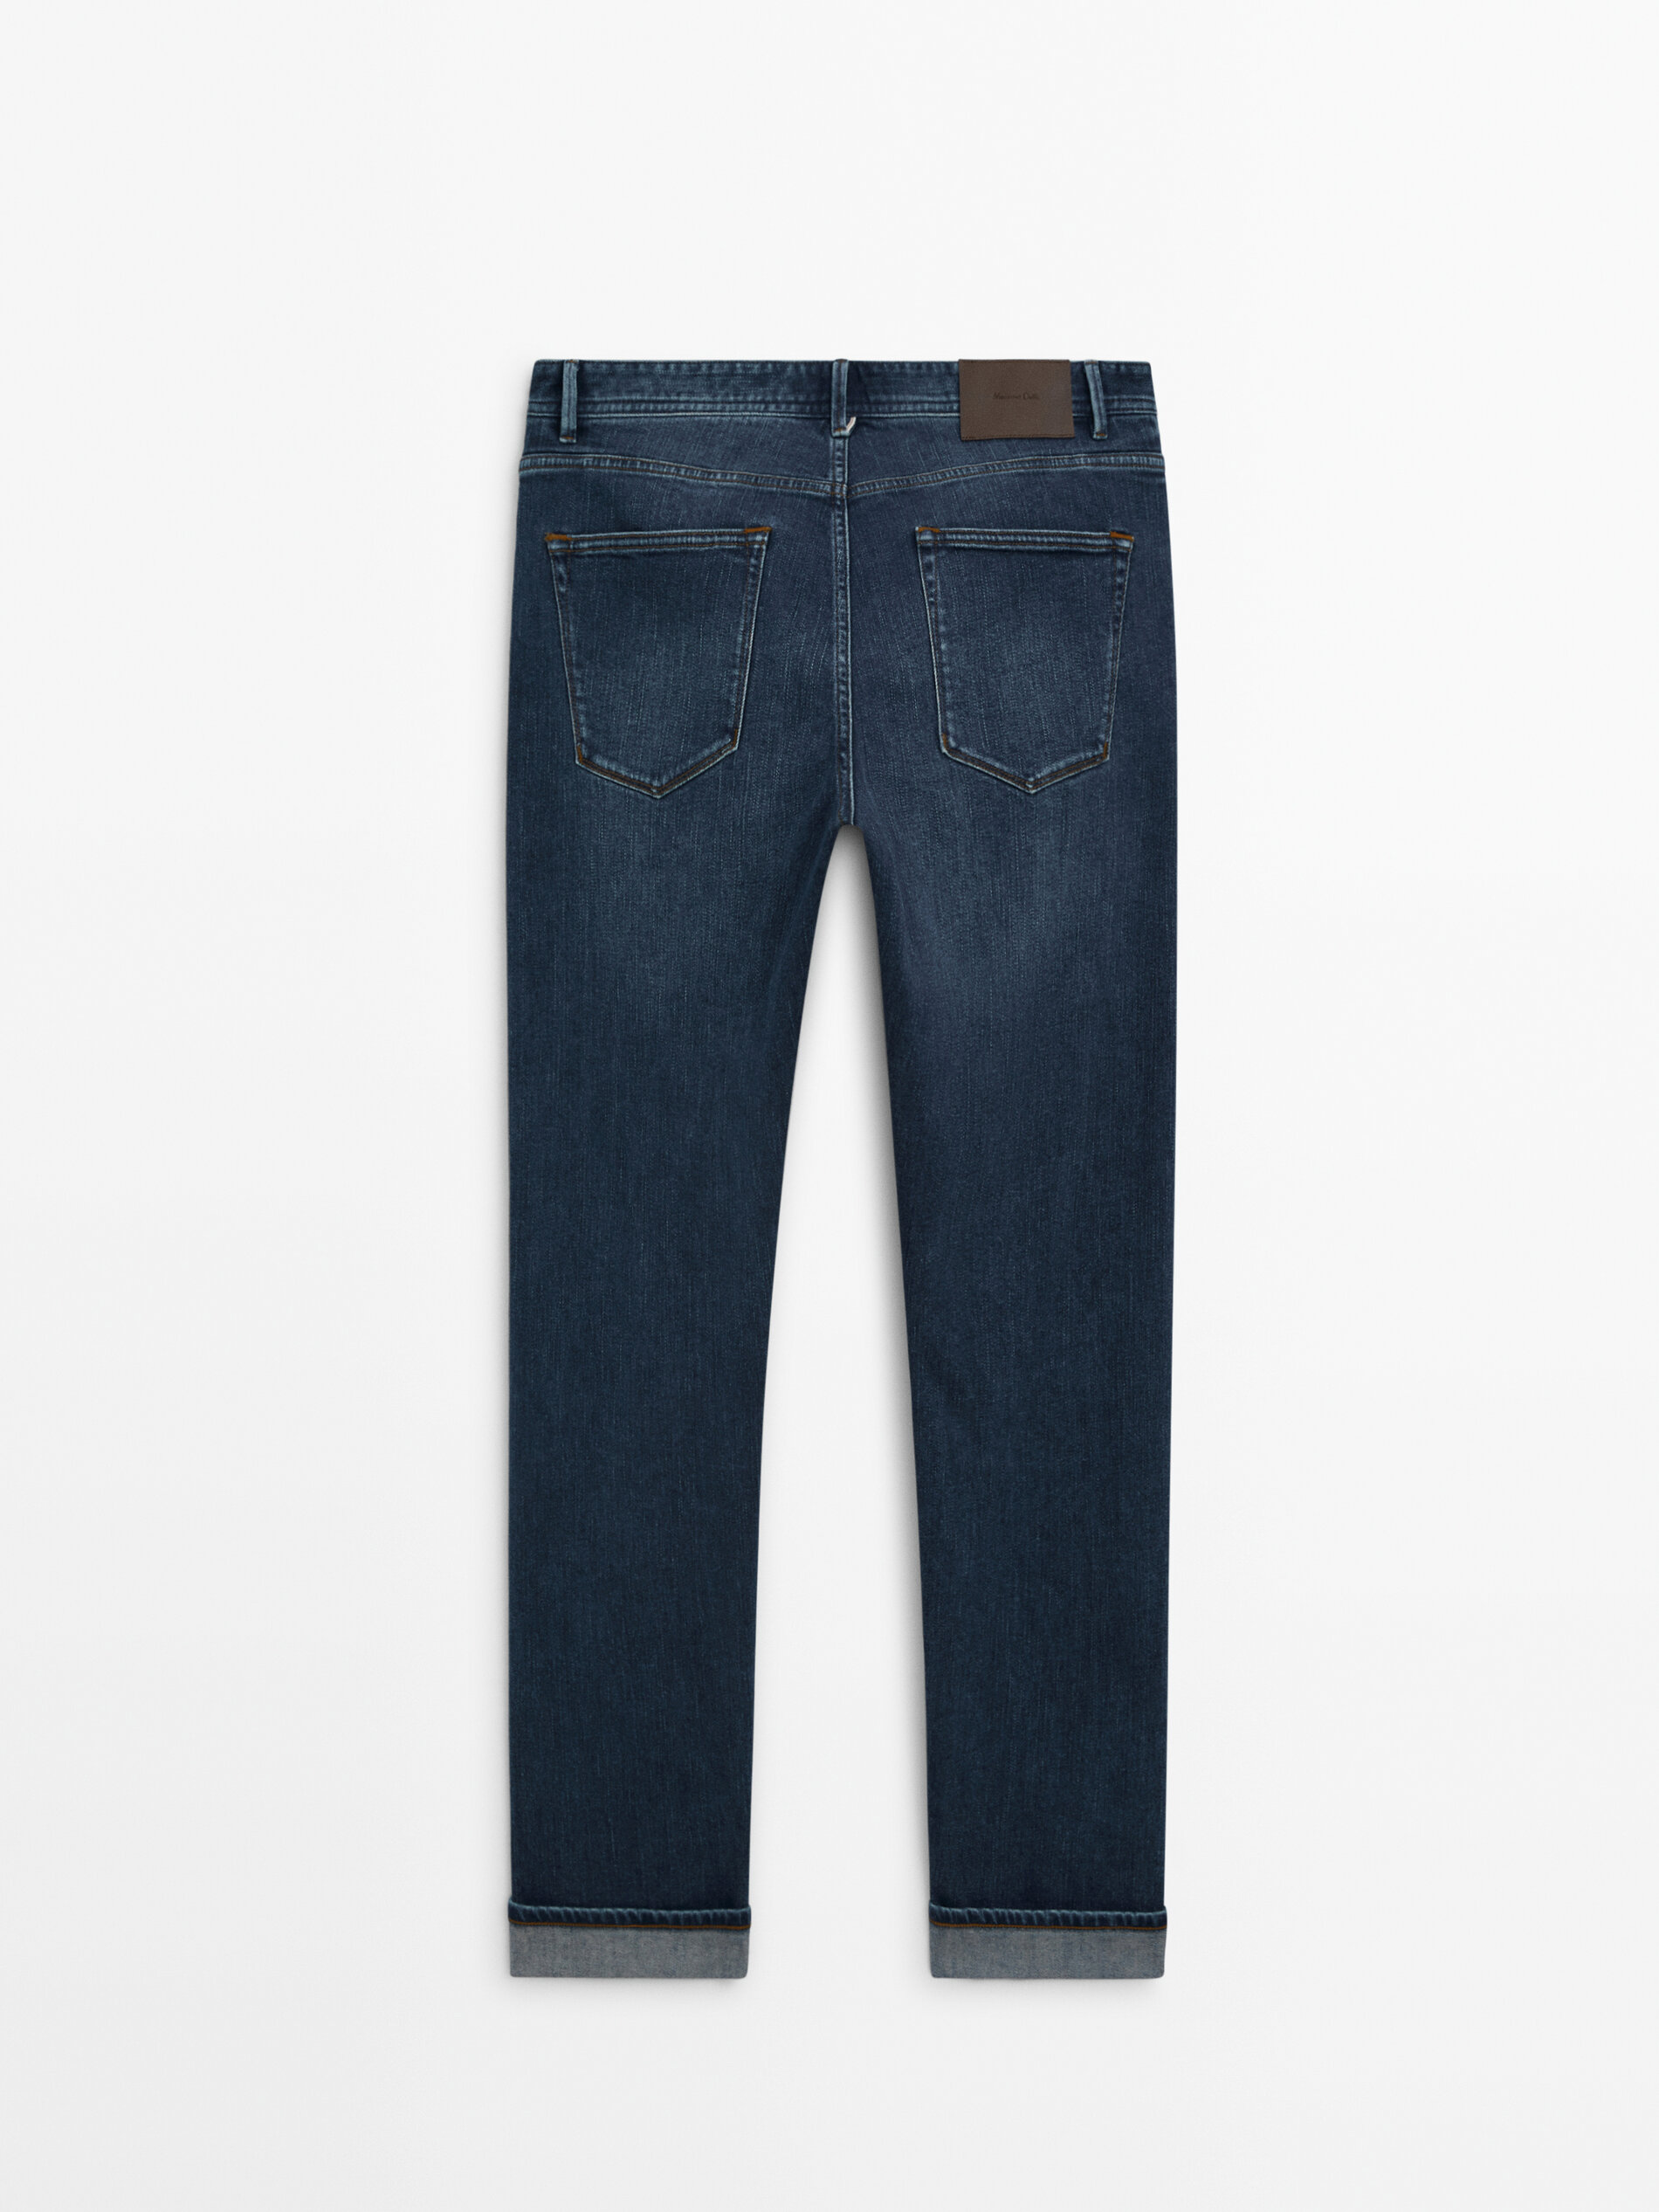 Jeans selvedge mid stone wash tapered fit